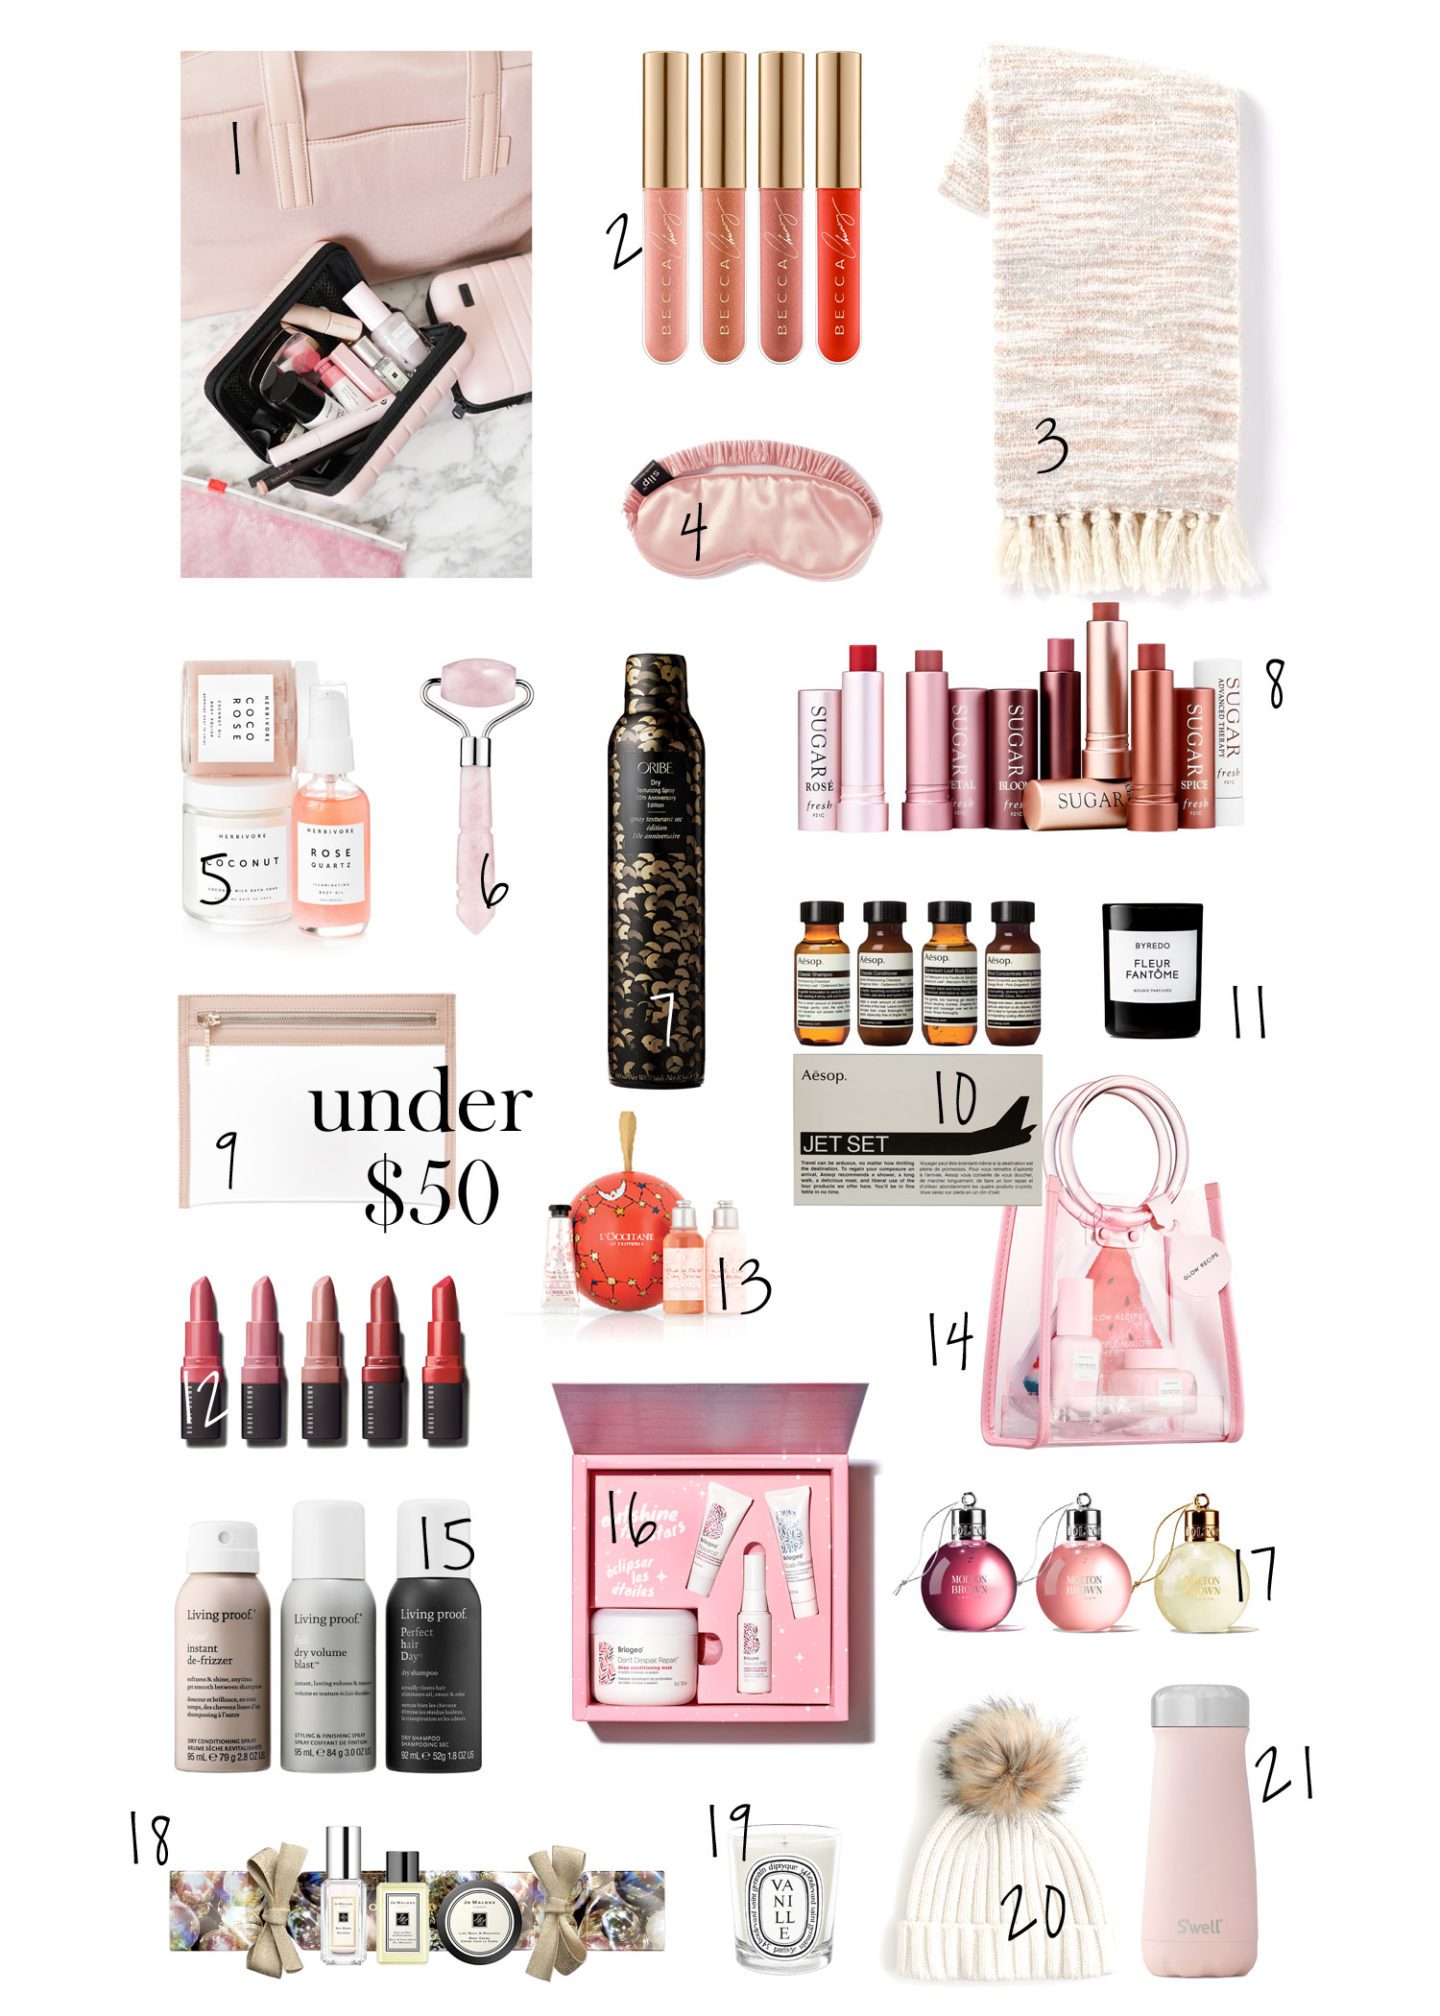 Holiday Gift Guide For Her Under $50